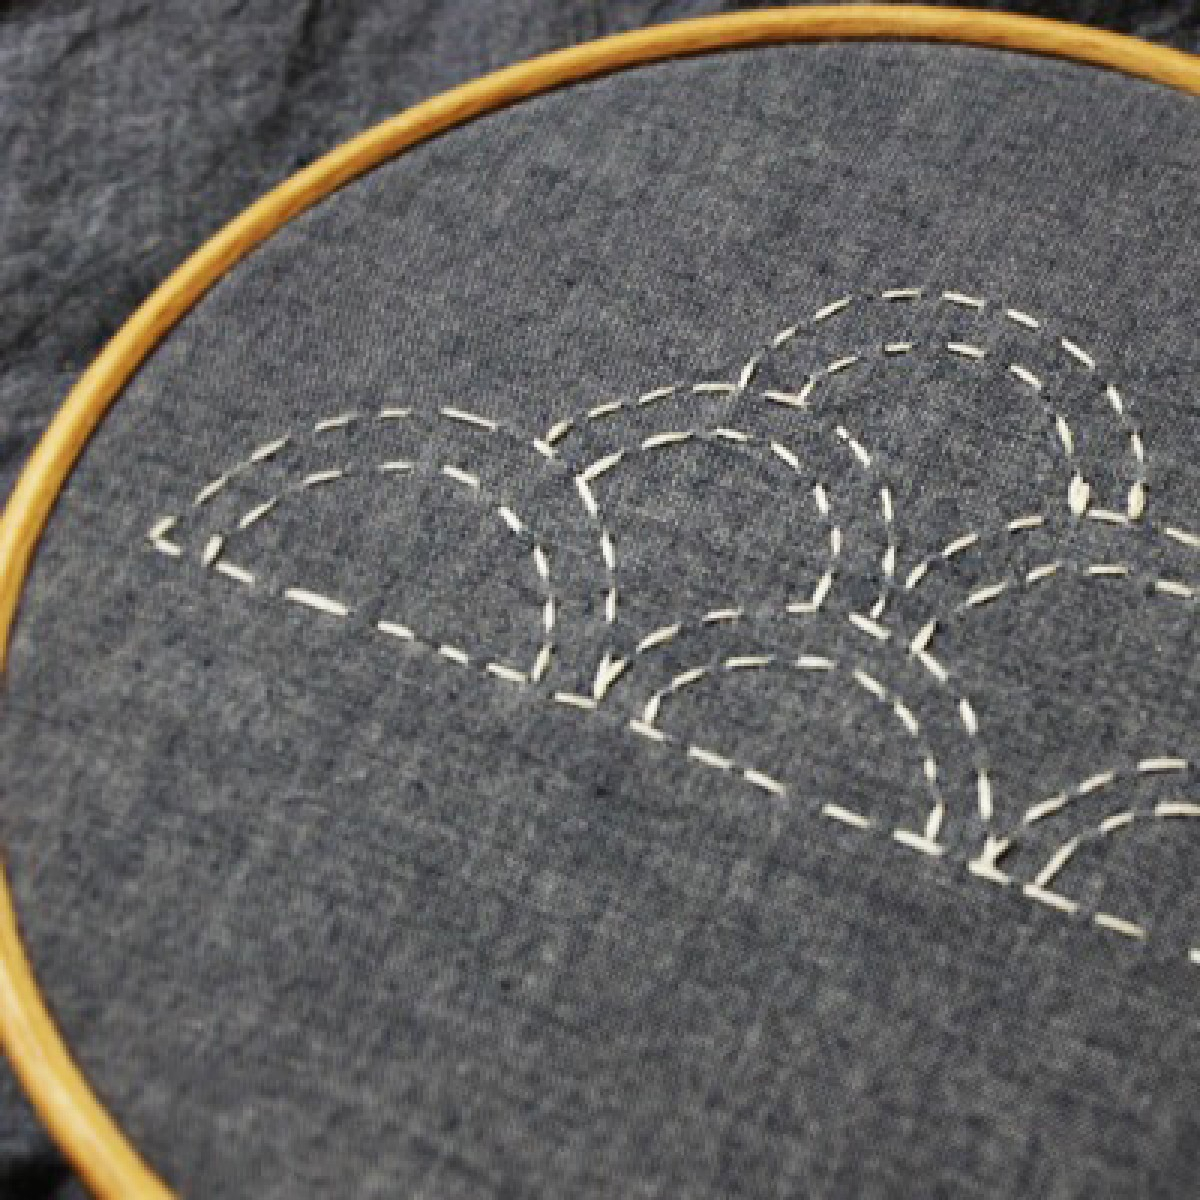 Sashiko Embroidery Patterns Learn Simple Sashiko Embroidery With This Whimsical Cloud Pattern